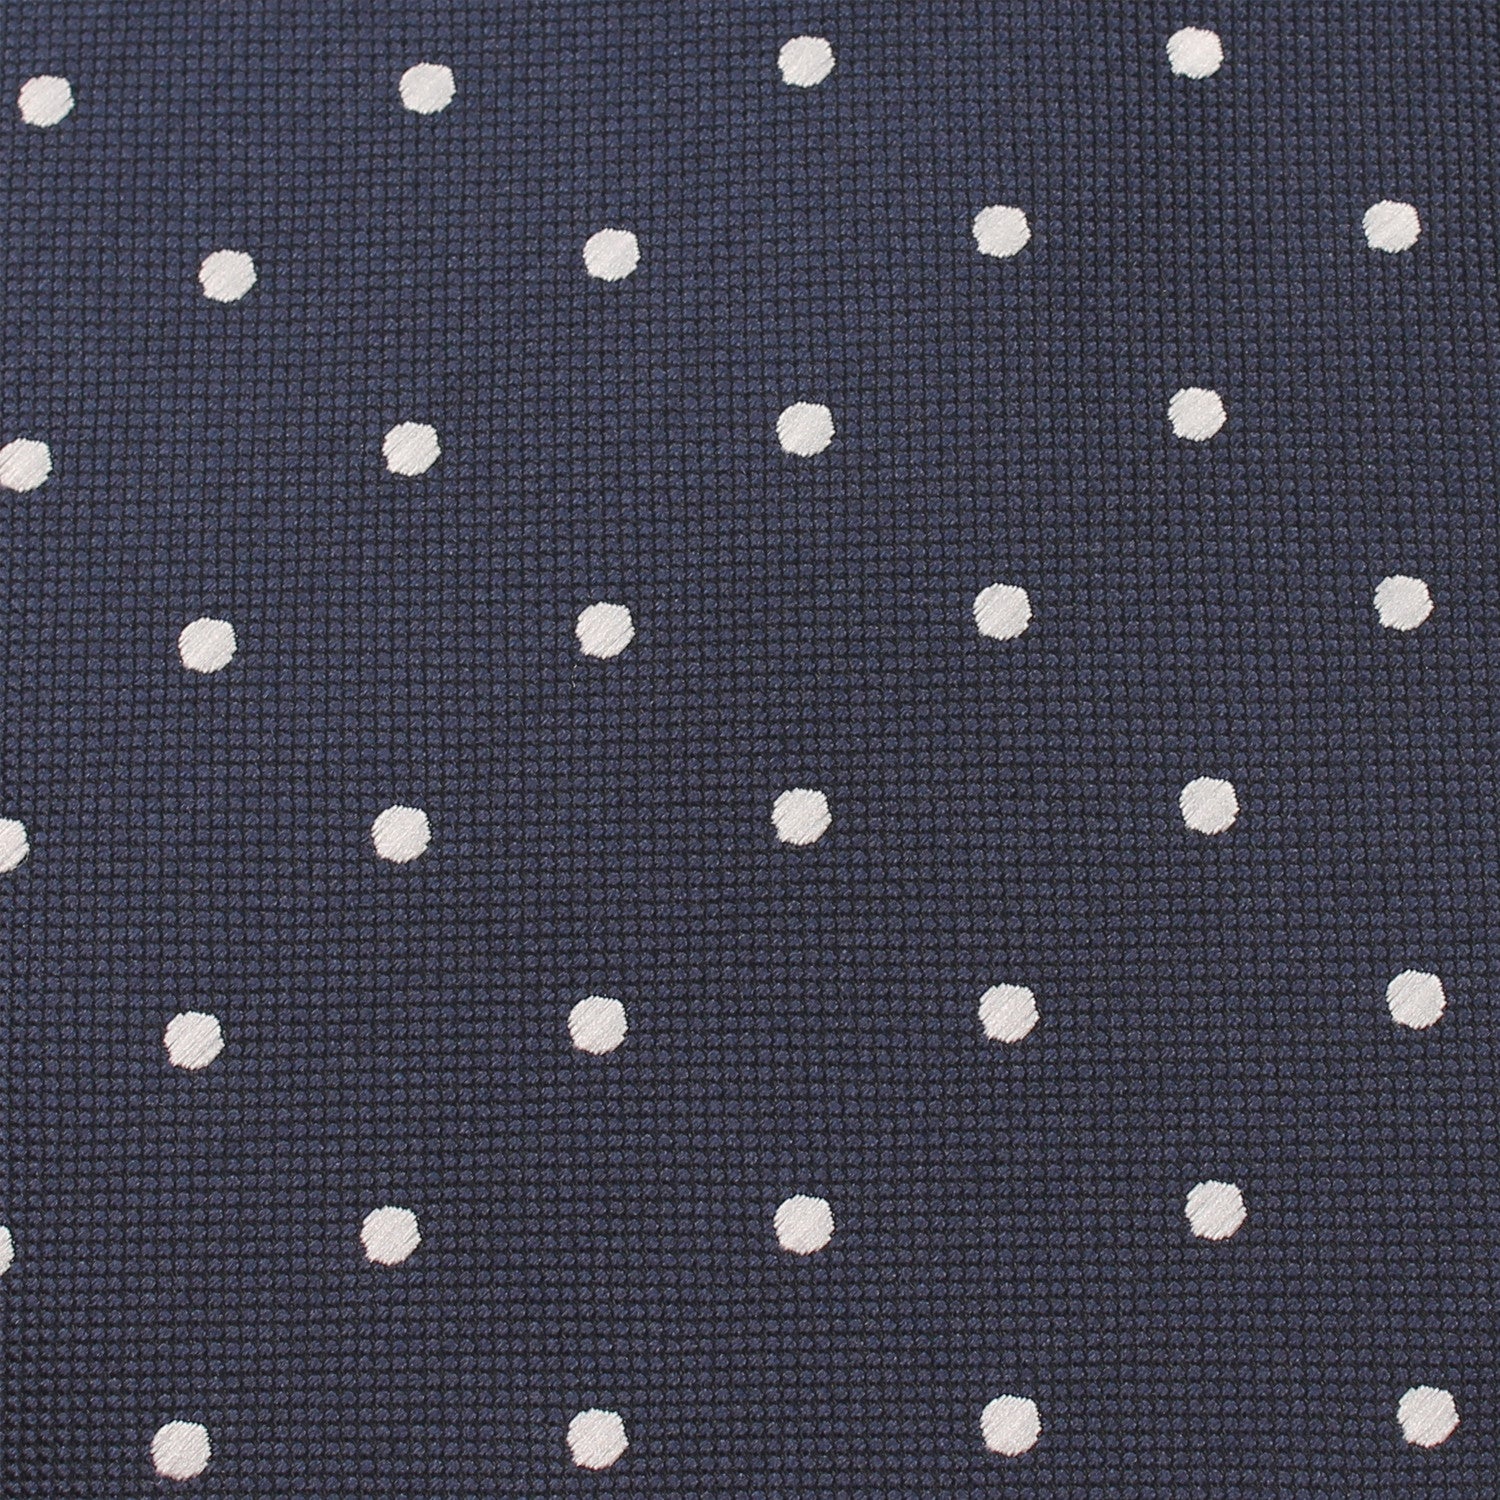 Navy Blue with White Polka Dots Tie Fabric